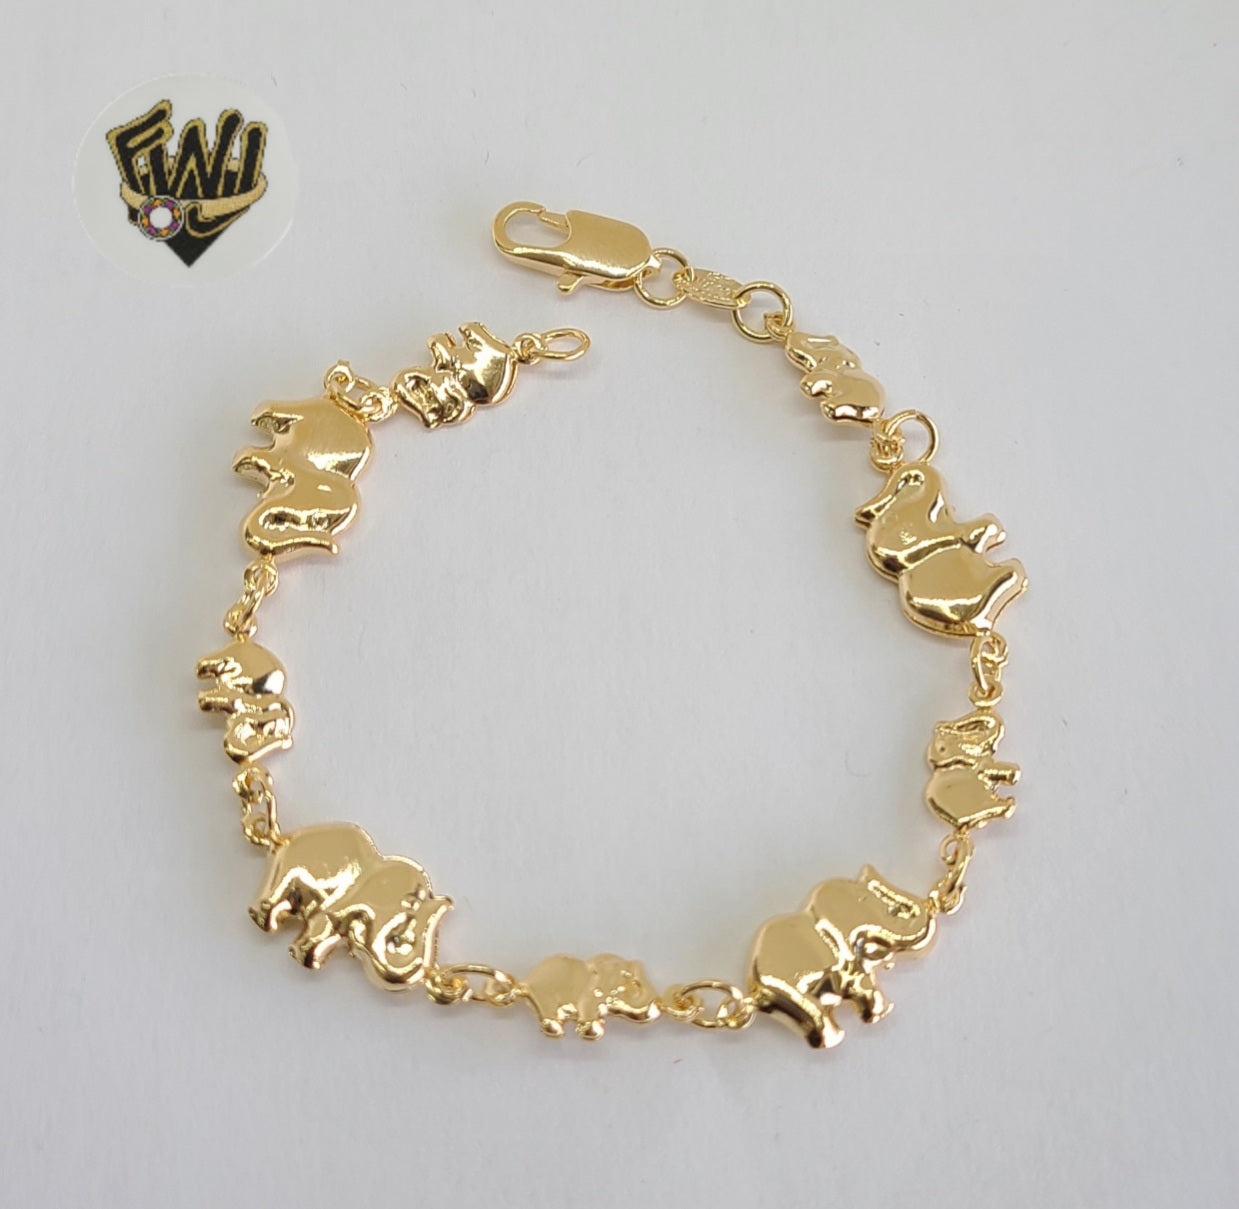 Womens Goodluck Elephant Chain Link Bracelet Solid 14k Yellow Gold 7mm –  The Jewelry Gallery of Oyster Bay